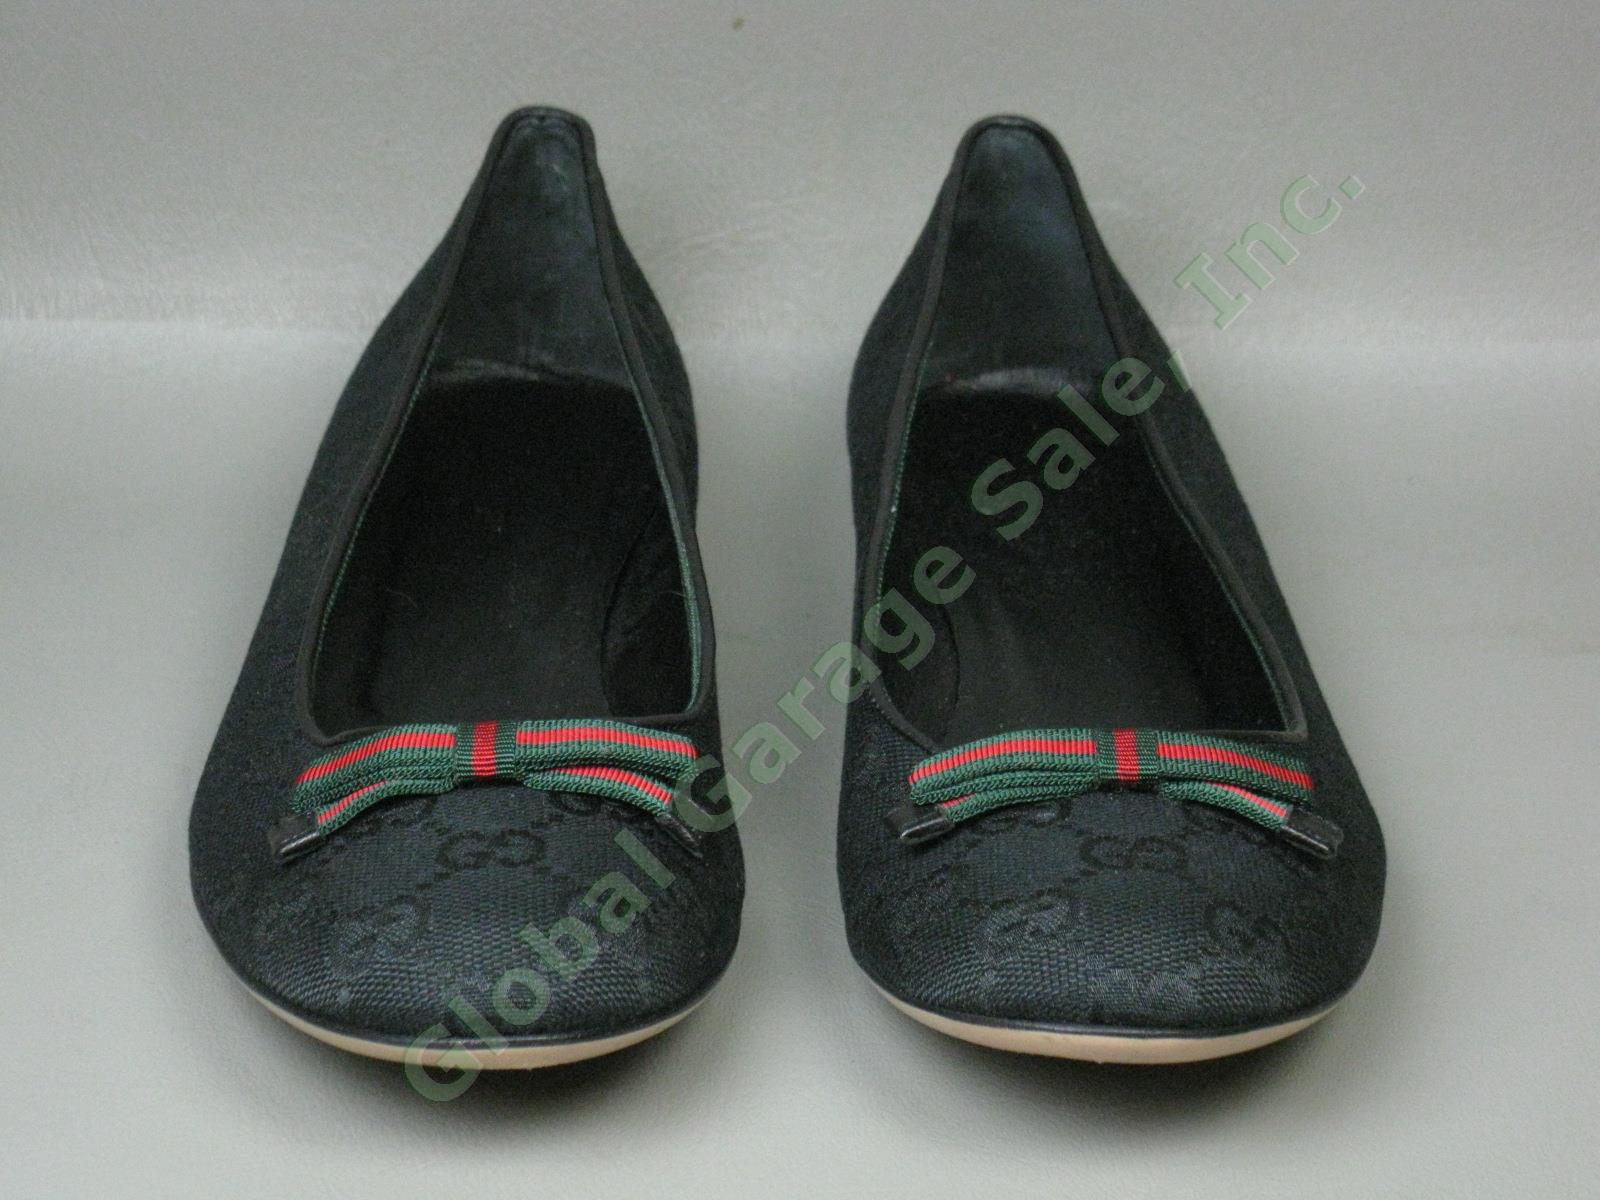 Womens Gucci Moca Tess S Cuoio Flats Size 7.5 Black One Owner With Box 161837 NR 2